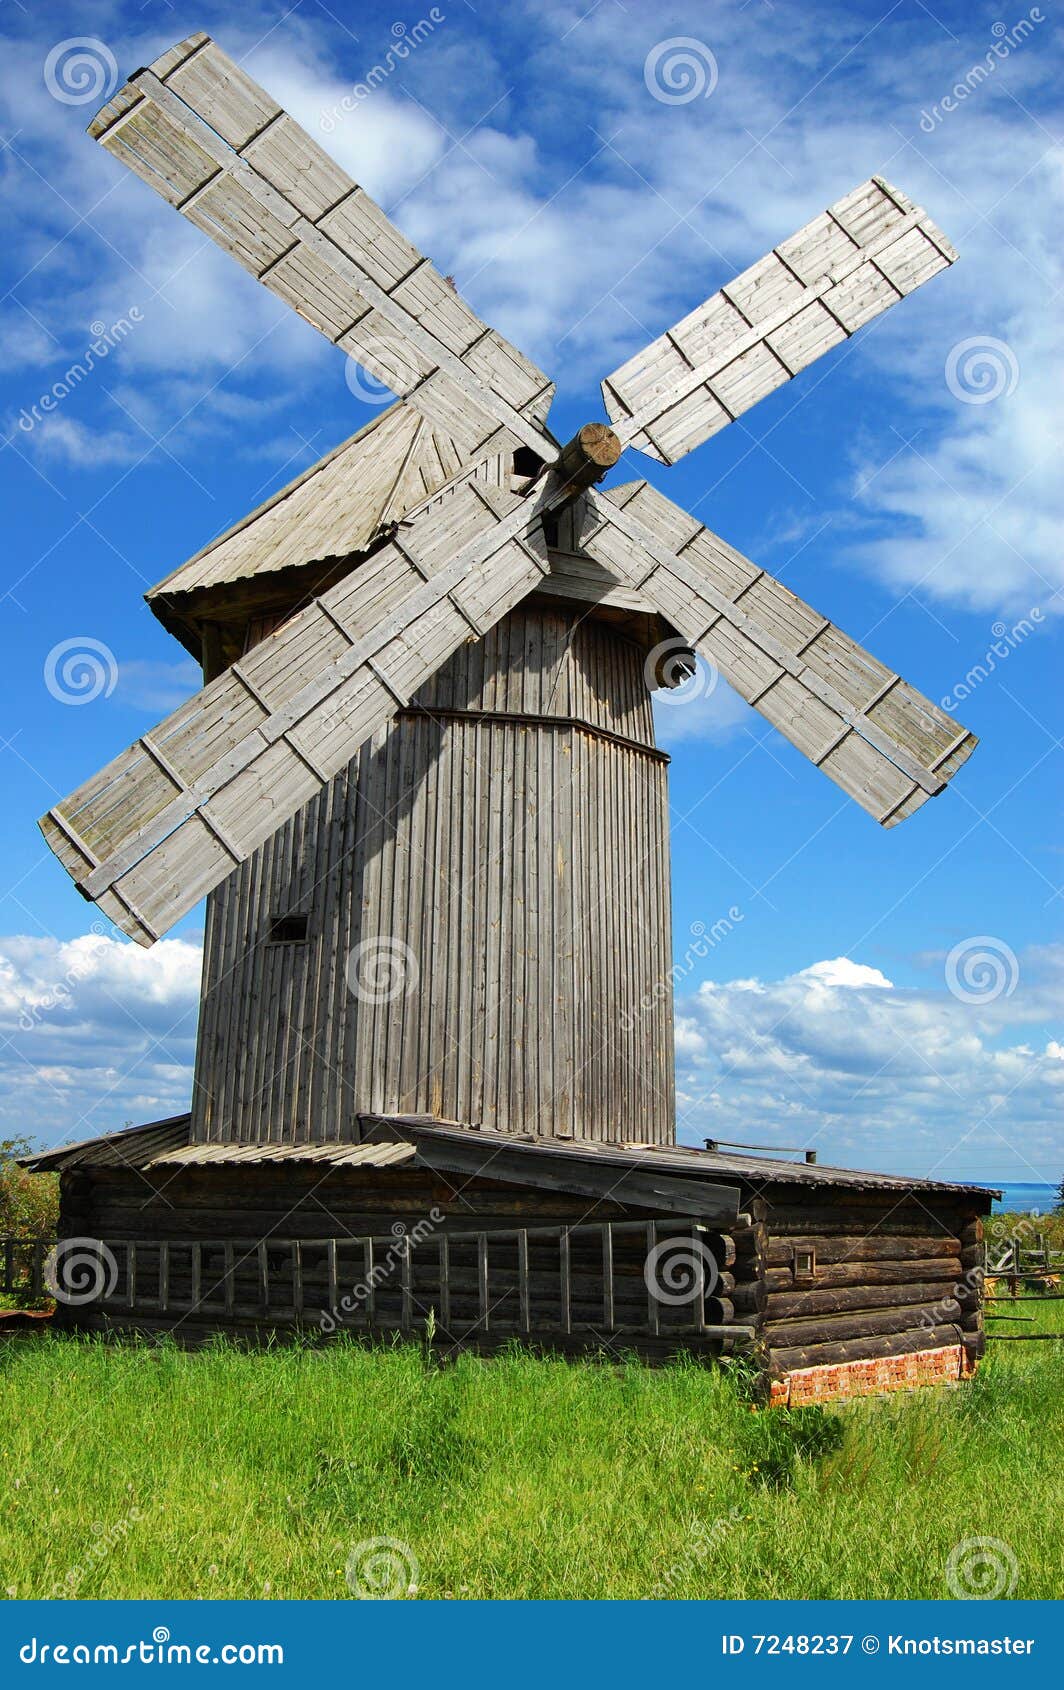 Old Windmill Royalty Free Stock Photography - Image: 7248237